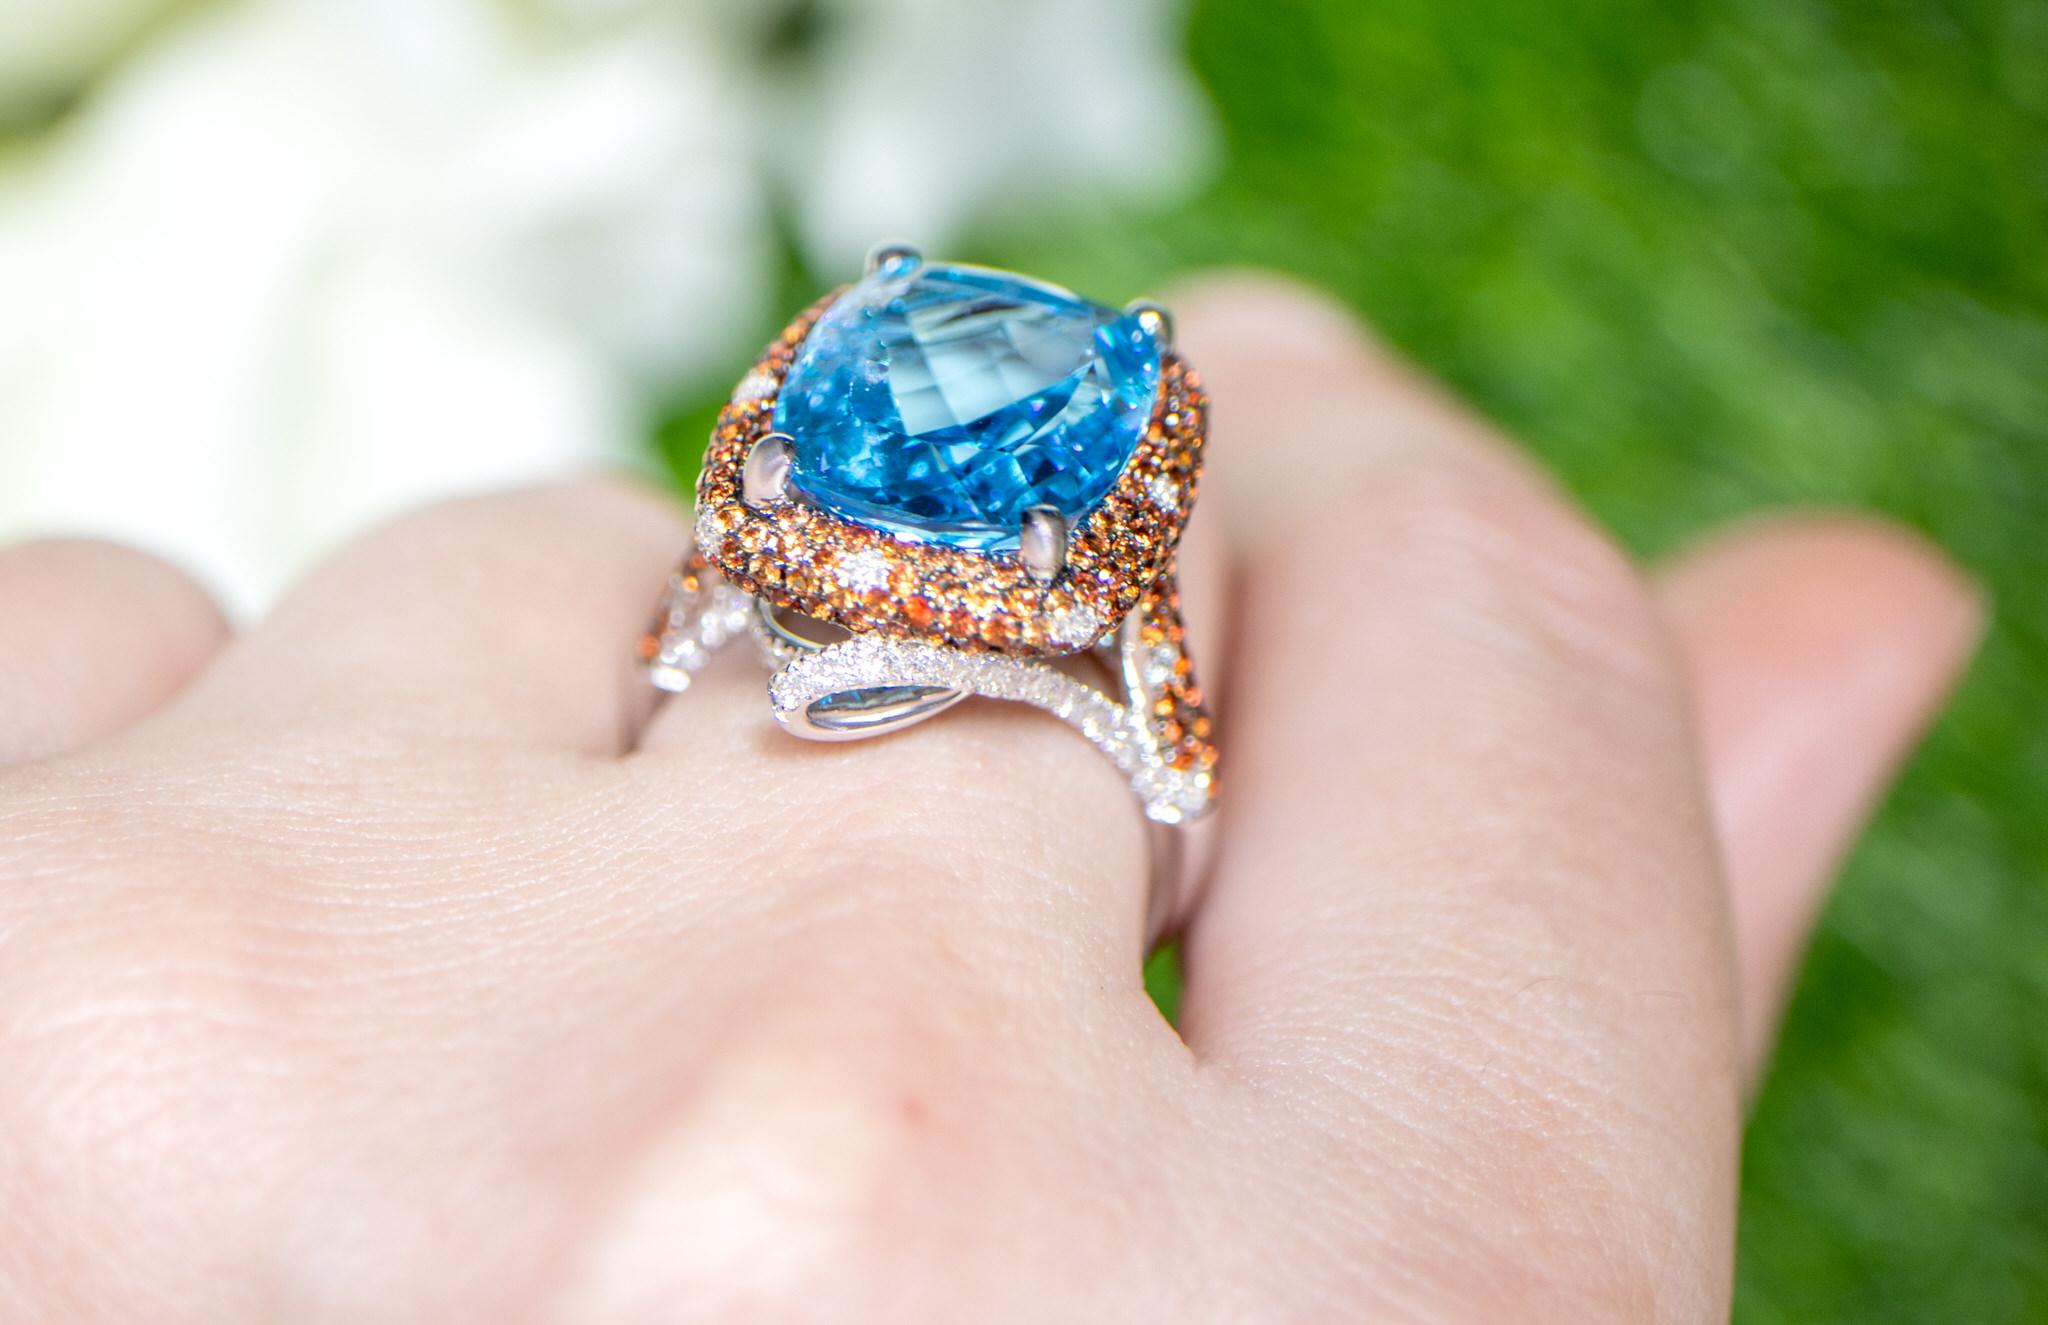 Swiss Blue Topaz Cocktail Ring Sapphires Diamonds 13.4 Carats 18K Gold In Excellent Condition For Sale In Laguna Niguel, CA